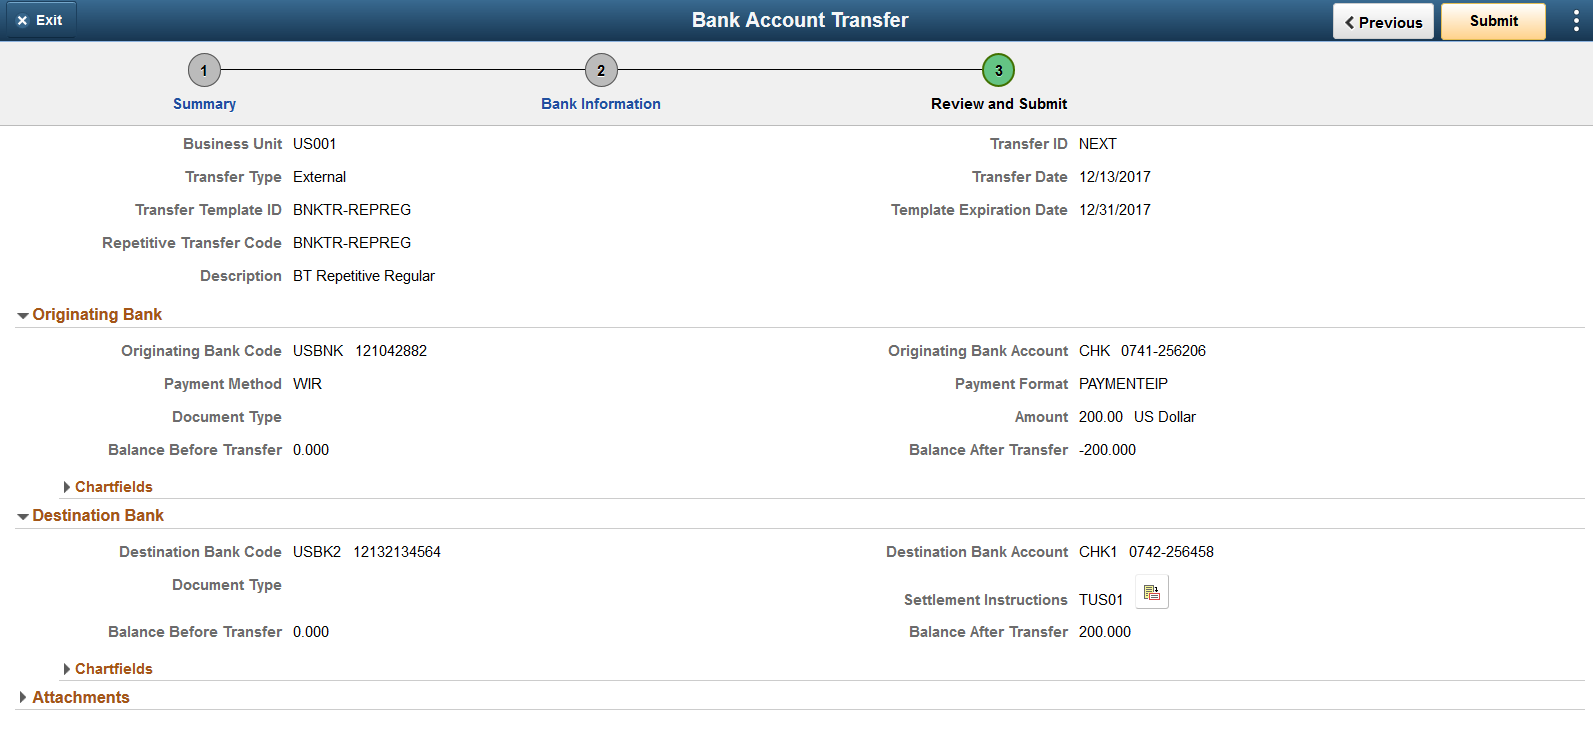 Bank Account Transfer - Review and Submit Page